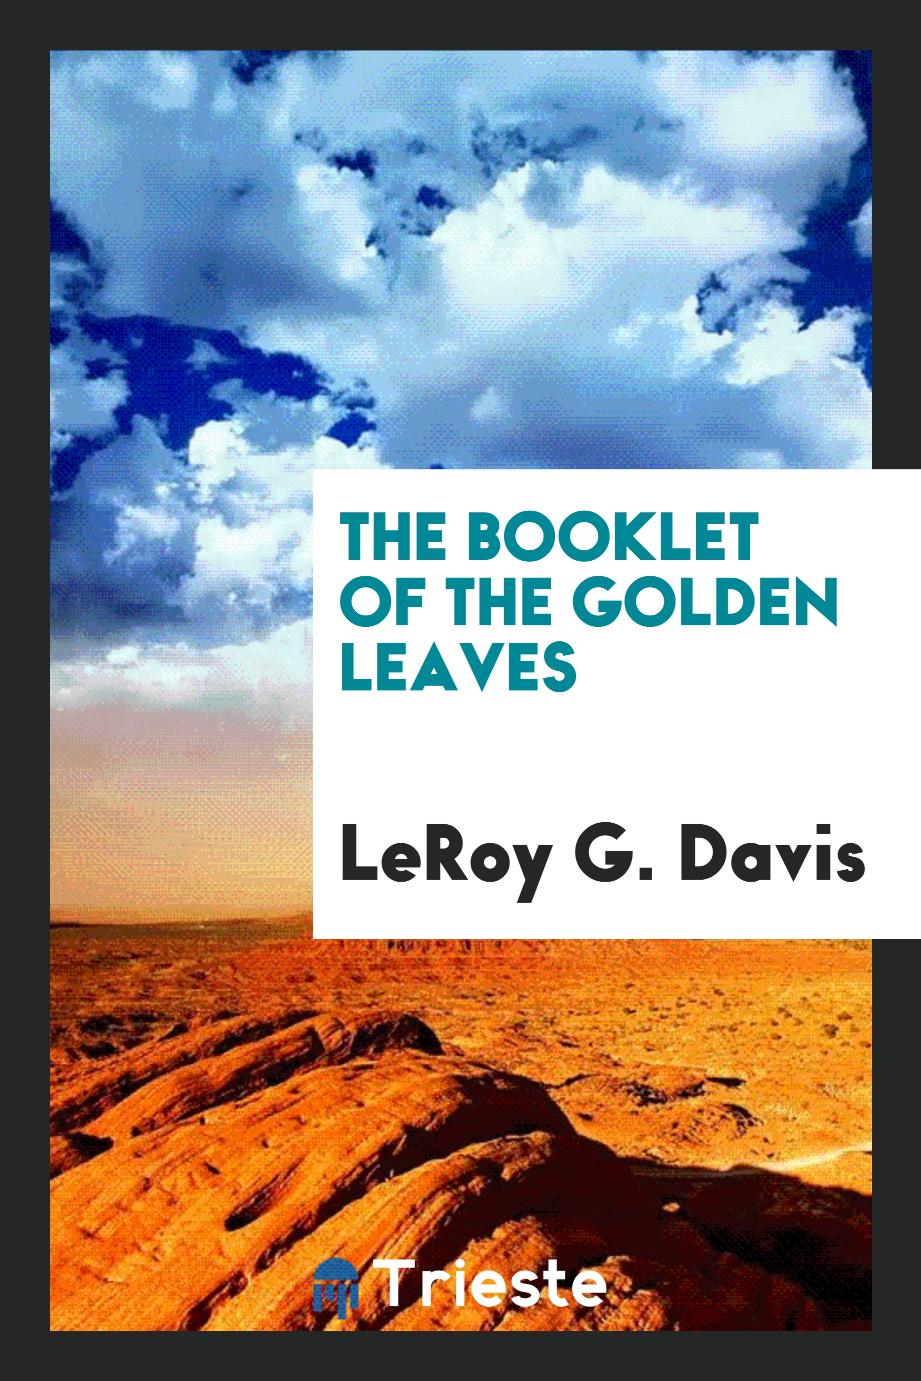 The Booklet of the Golden Leaves